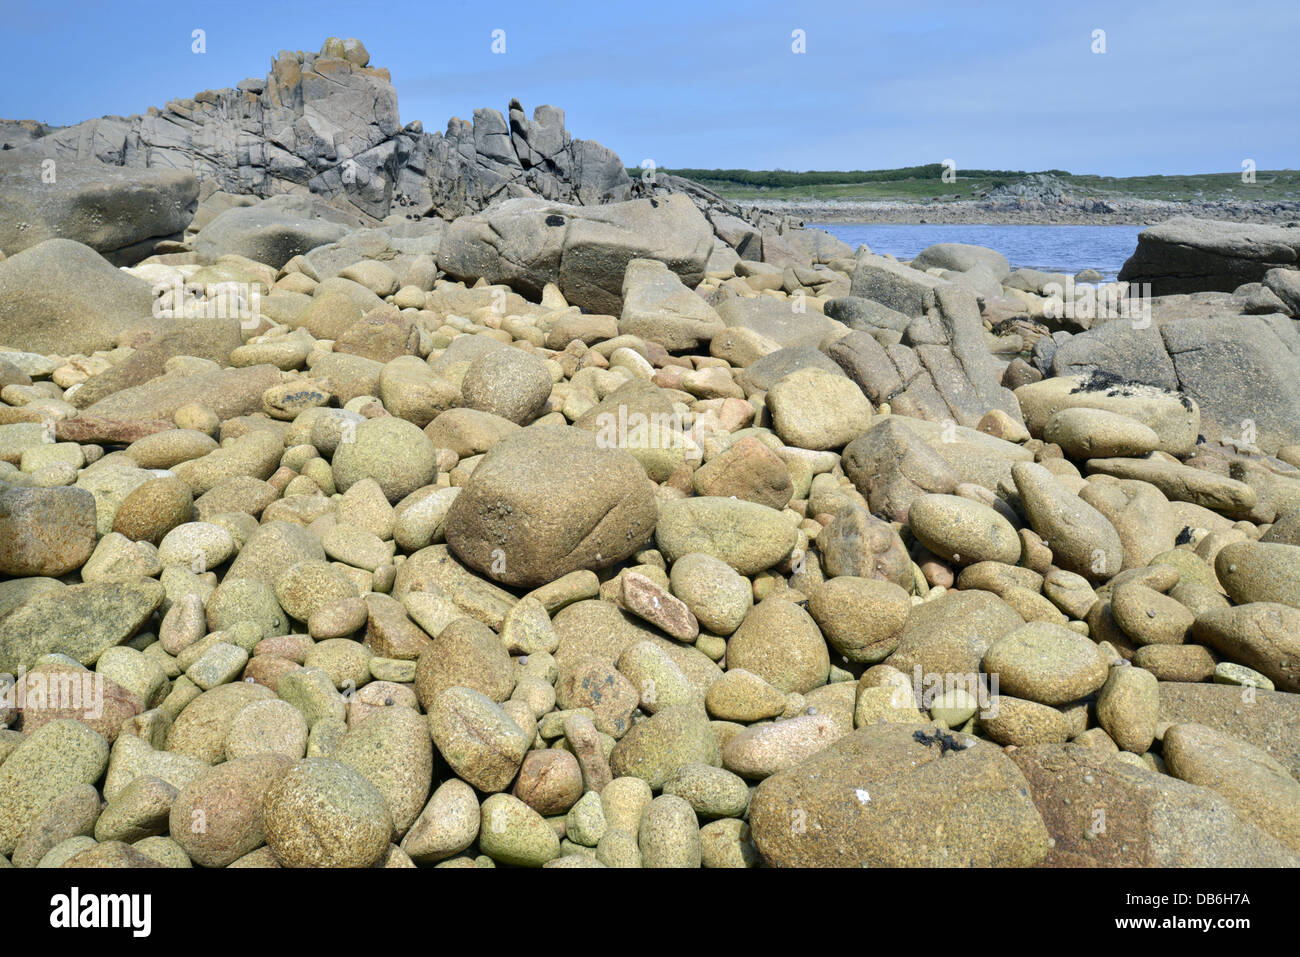 Boulder Beach, St. Agnes, Isles of Scilly Stockfoto